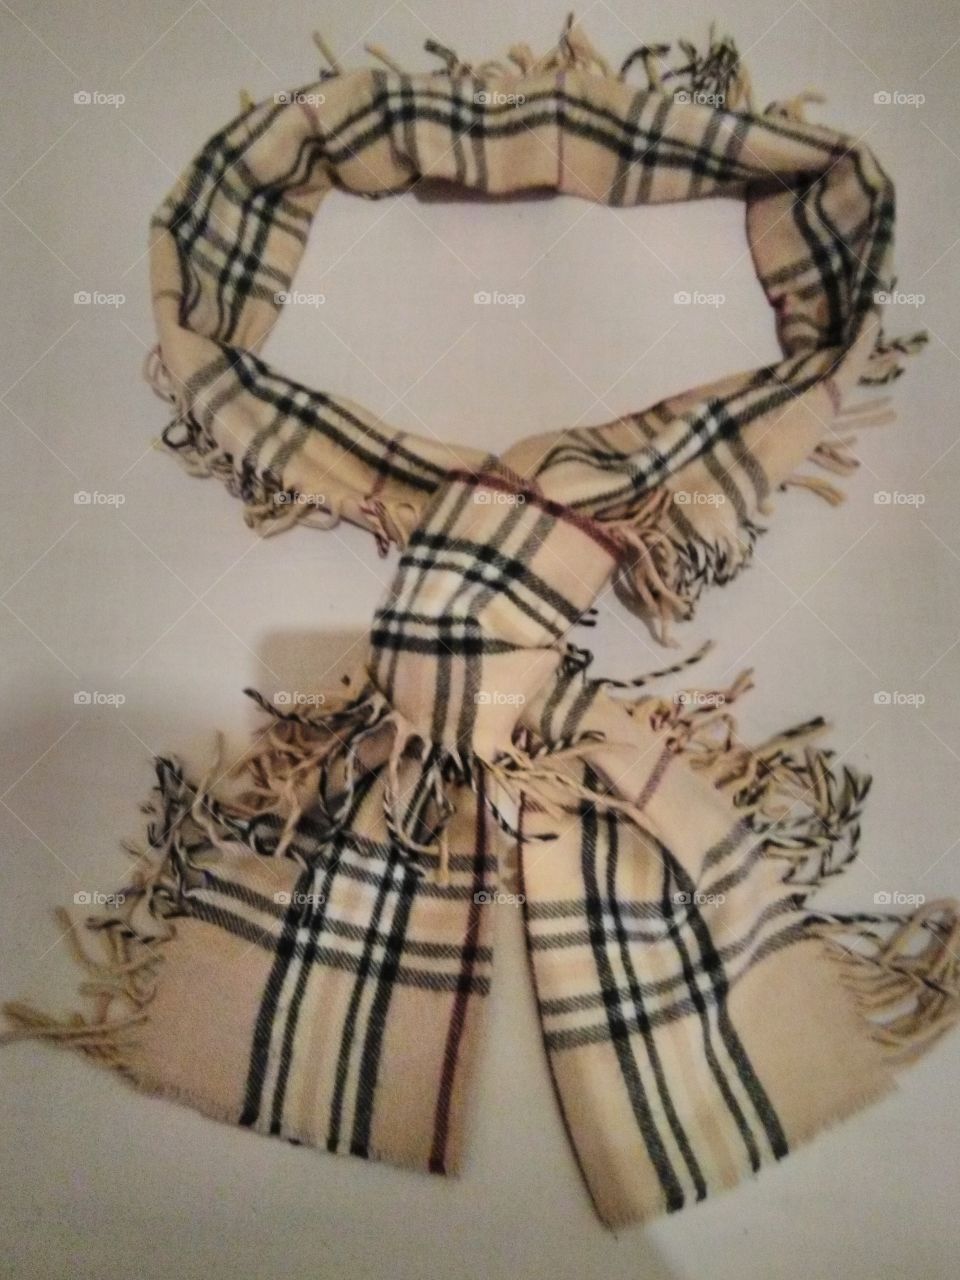 This photo shows a stylish Burberry scarf which is both feminine and masculine. It can be worn with both casual or official attires.